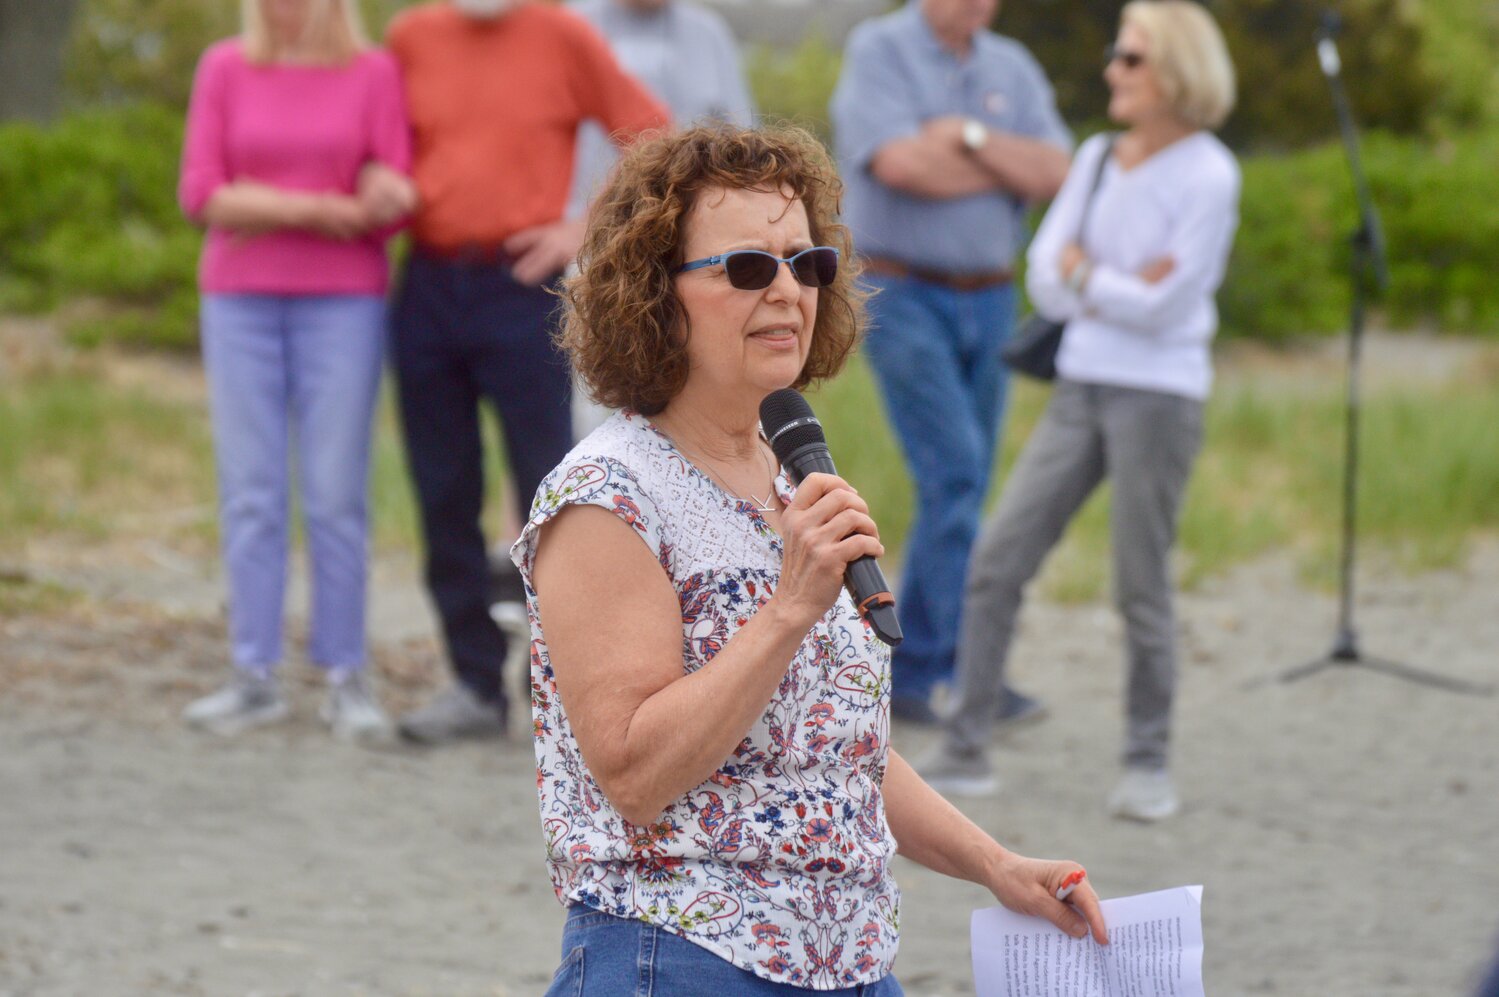 Karen Gleason, who served as the emcee for the rally, urged everyone to attend a Town Council workshop on SouthCoast Wind’s plans at 7 p.m. on Thursday, May 25, at Portsmouth High School.